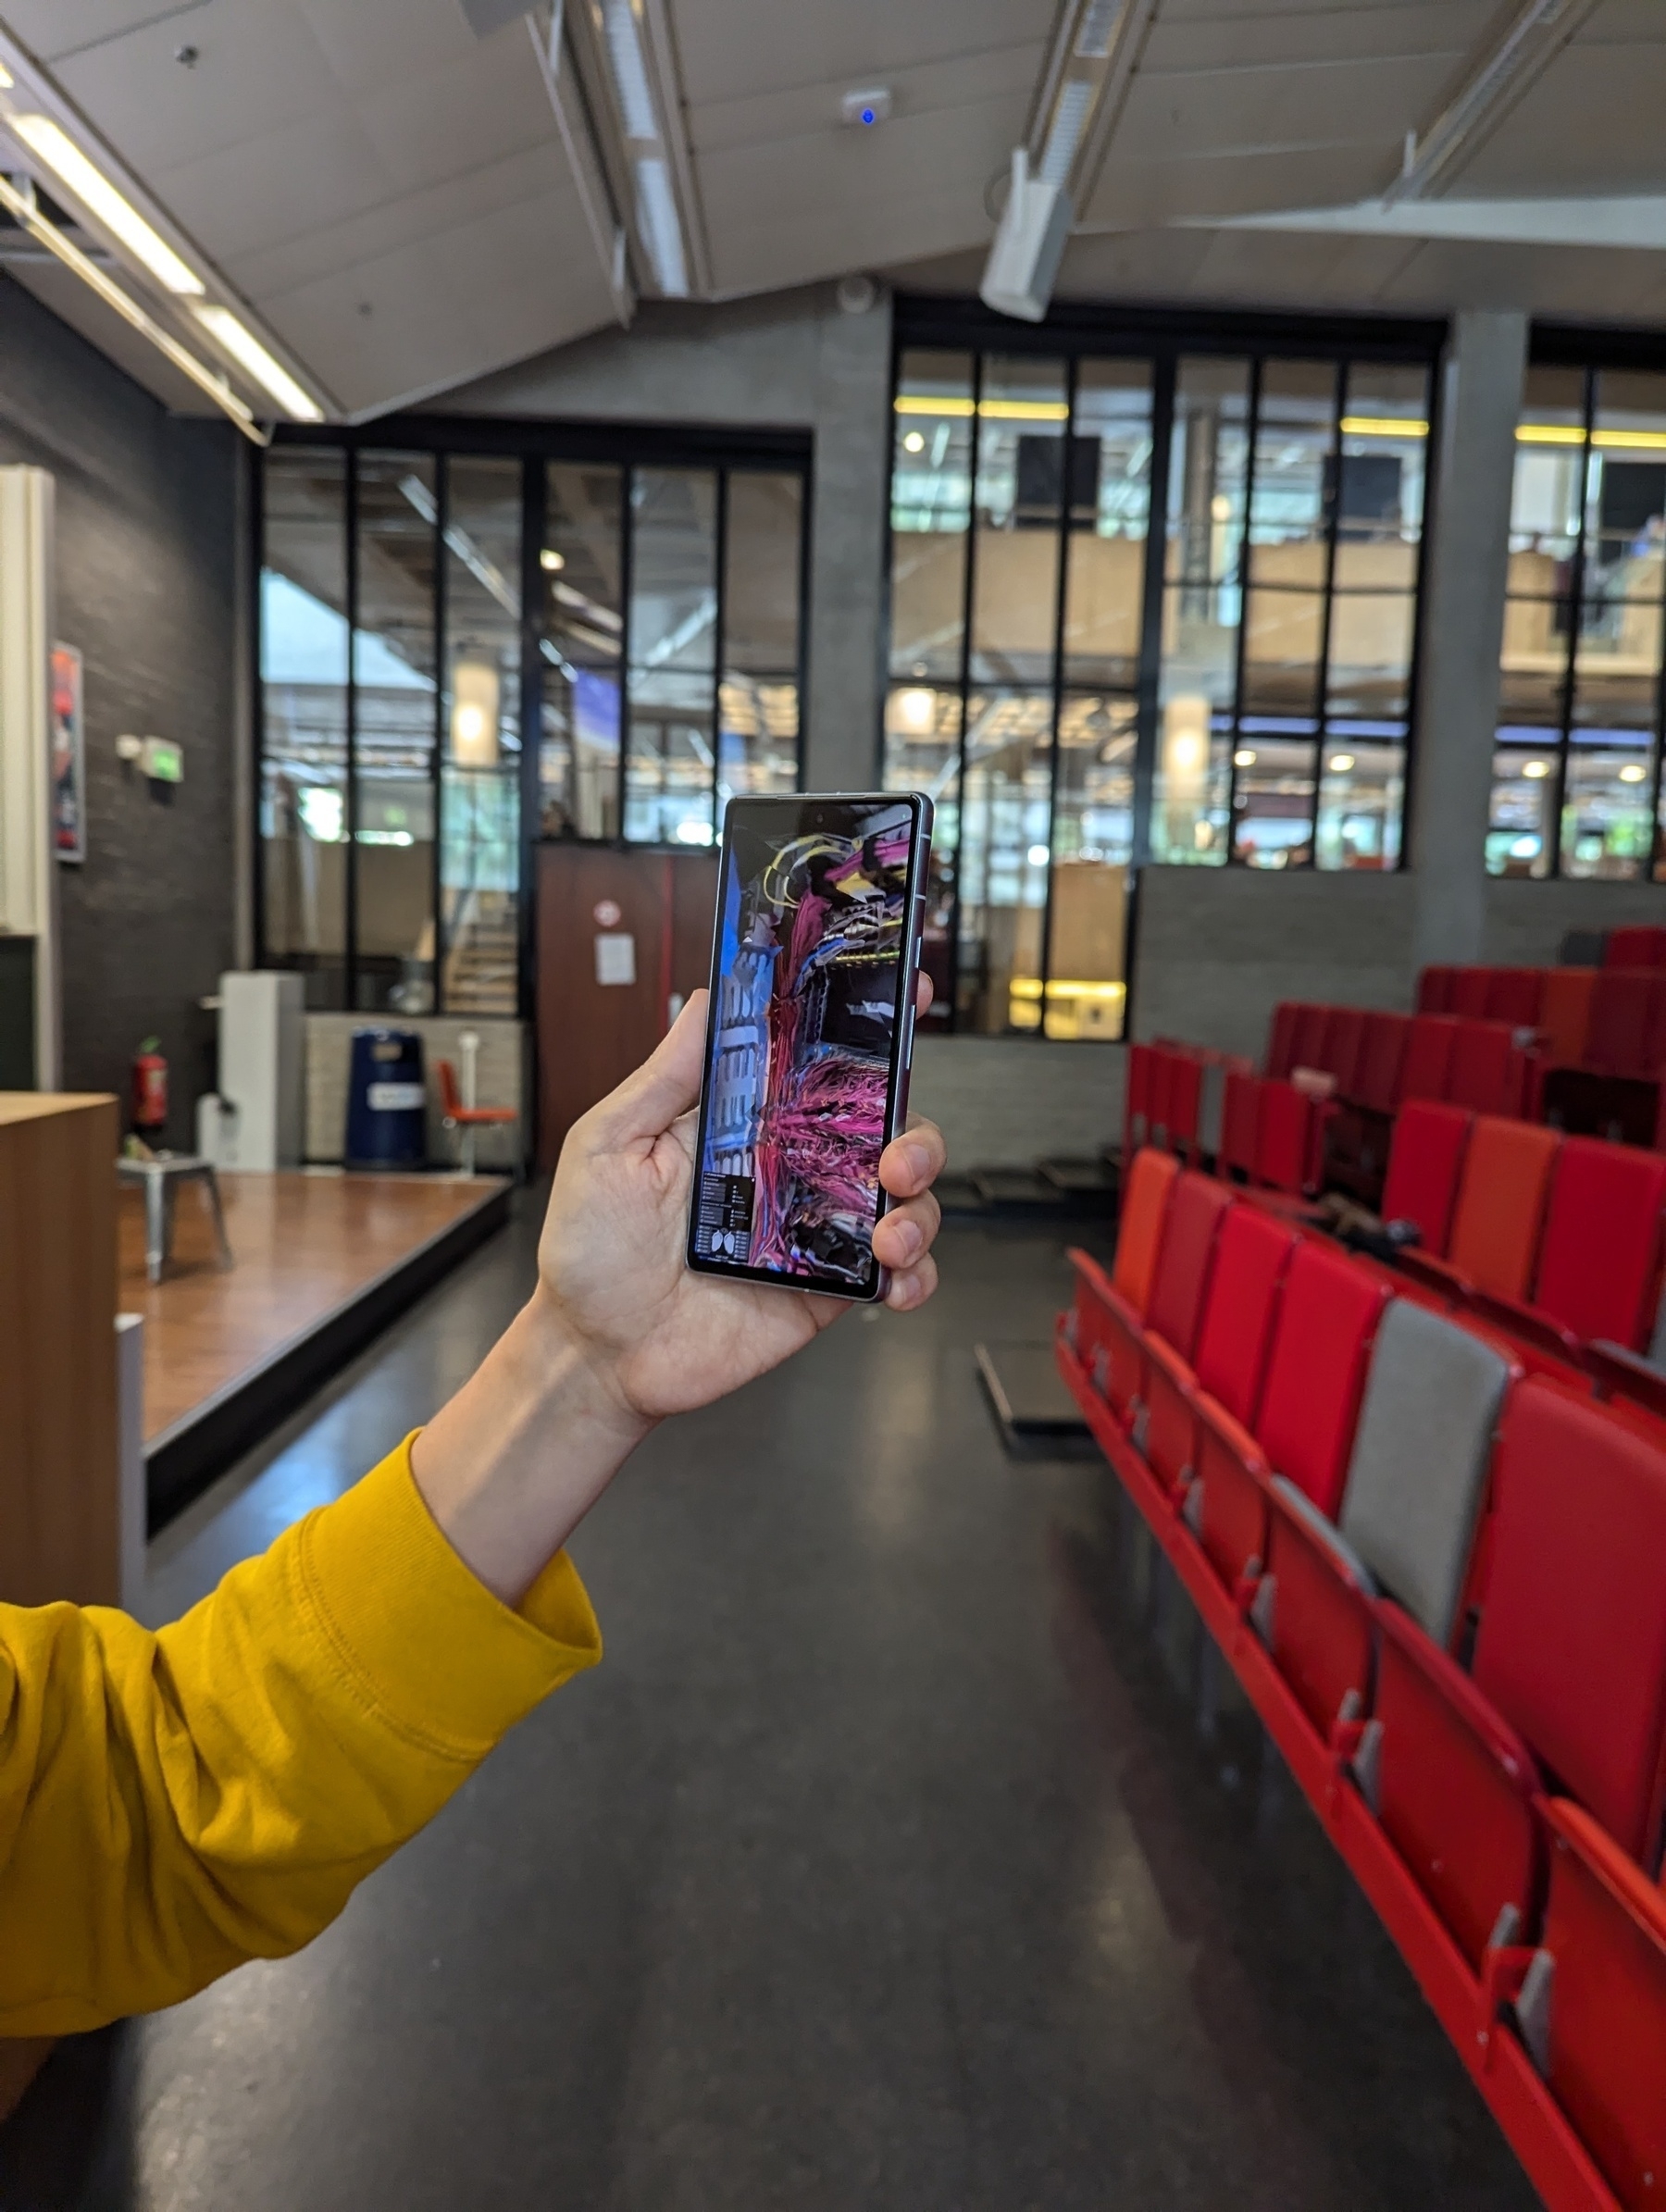 A person in a lecture hall, holding up an artificial reality app that puts a data centre into the cathedral. You see this on the phone. Chalk board area to the left, audience with red seats to the right. And there are hidden Easter eggs in the app 